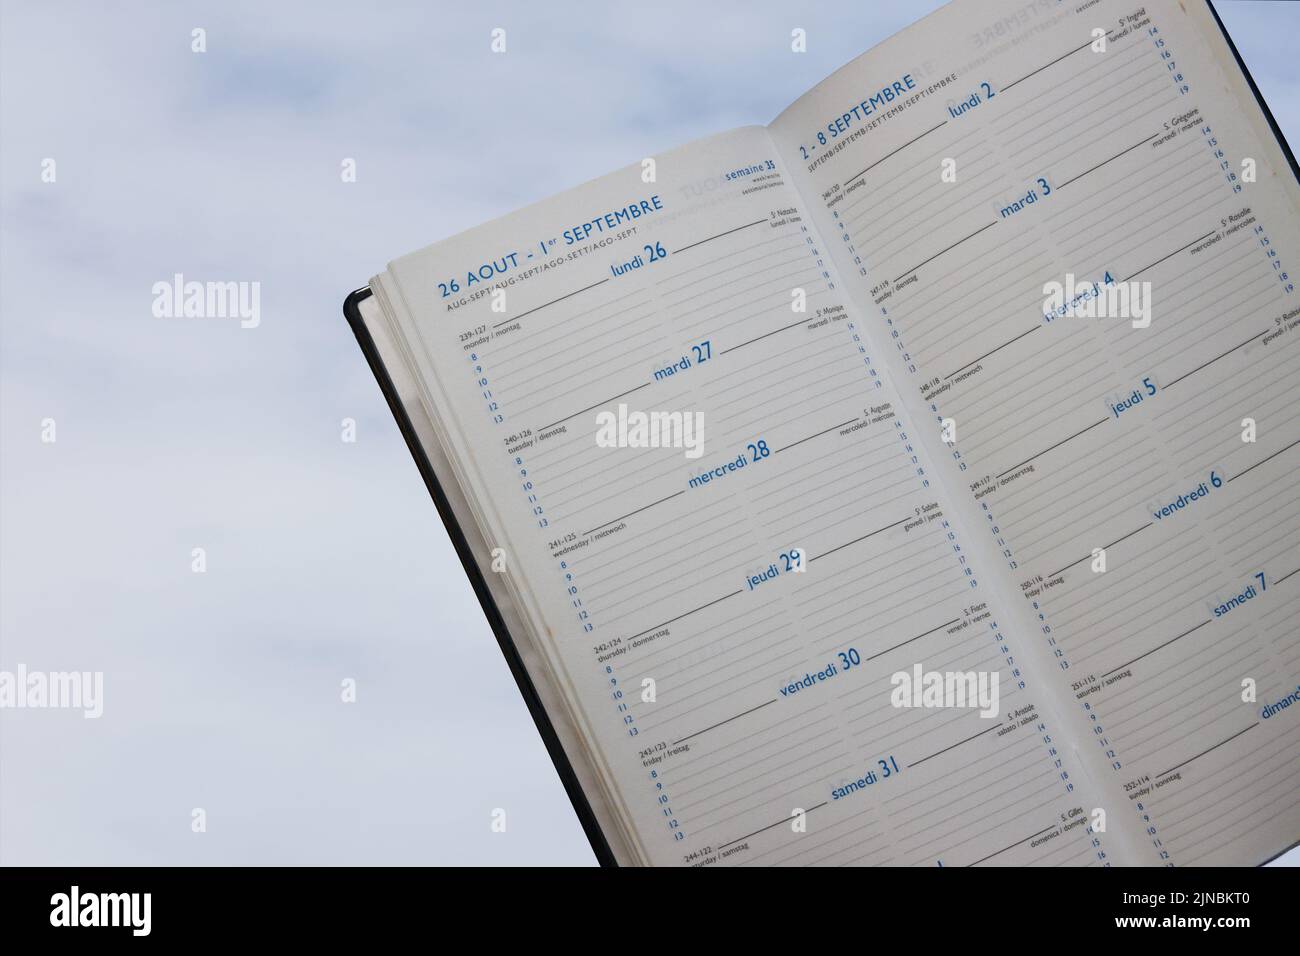 Close-up of the blank pages of a planner that is printed in French, English, Spanish, Italian and German with the cloudy sky in the background Stock Photo